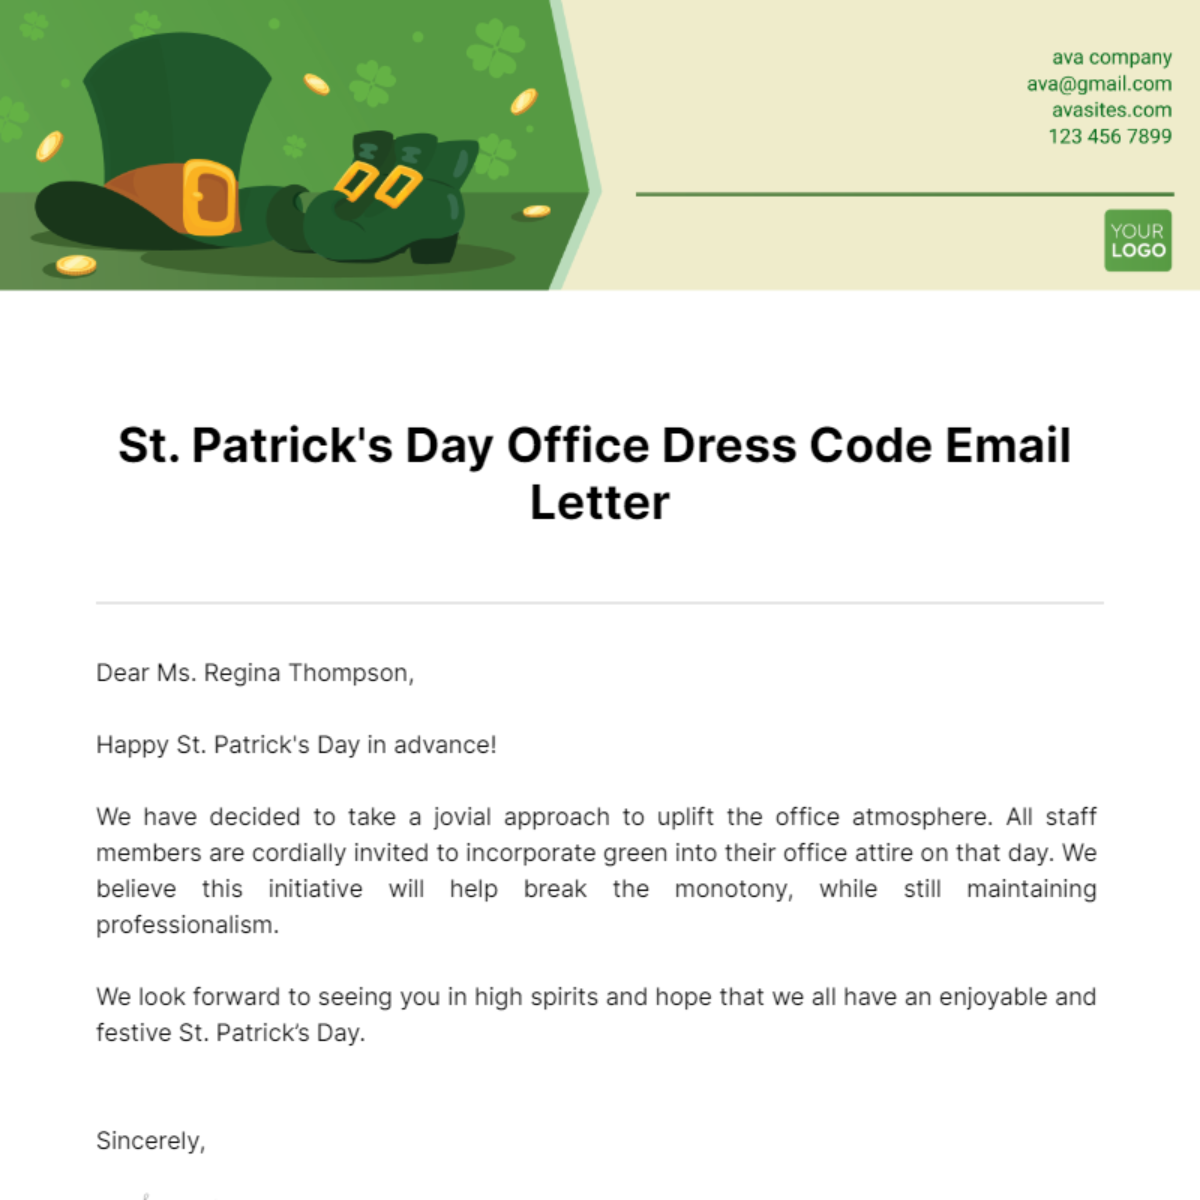 St. Patrick's Day Office Dress Code Email Letter Template